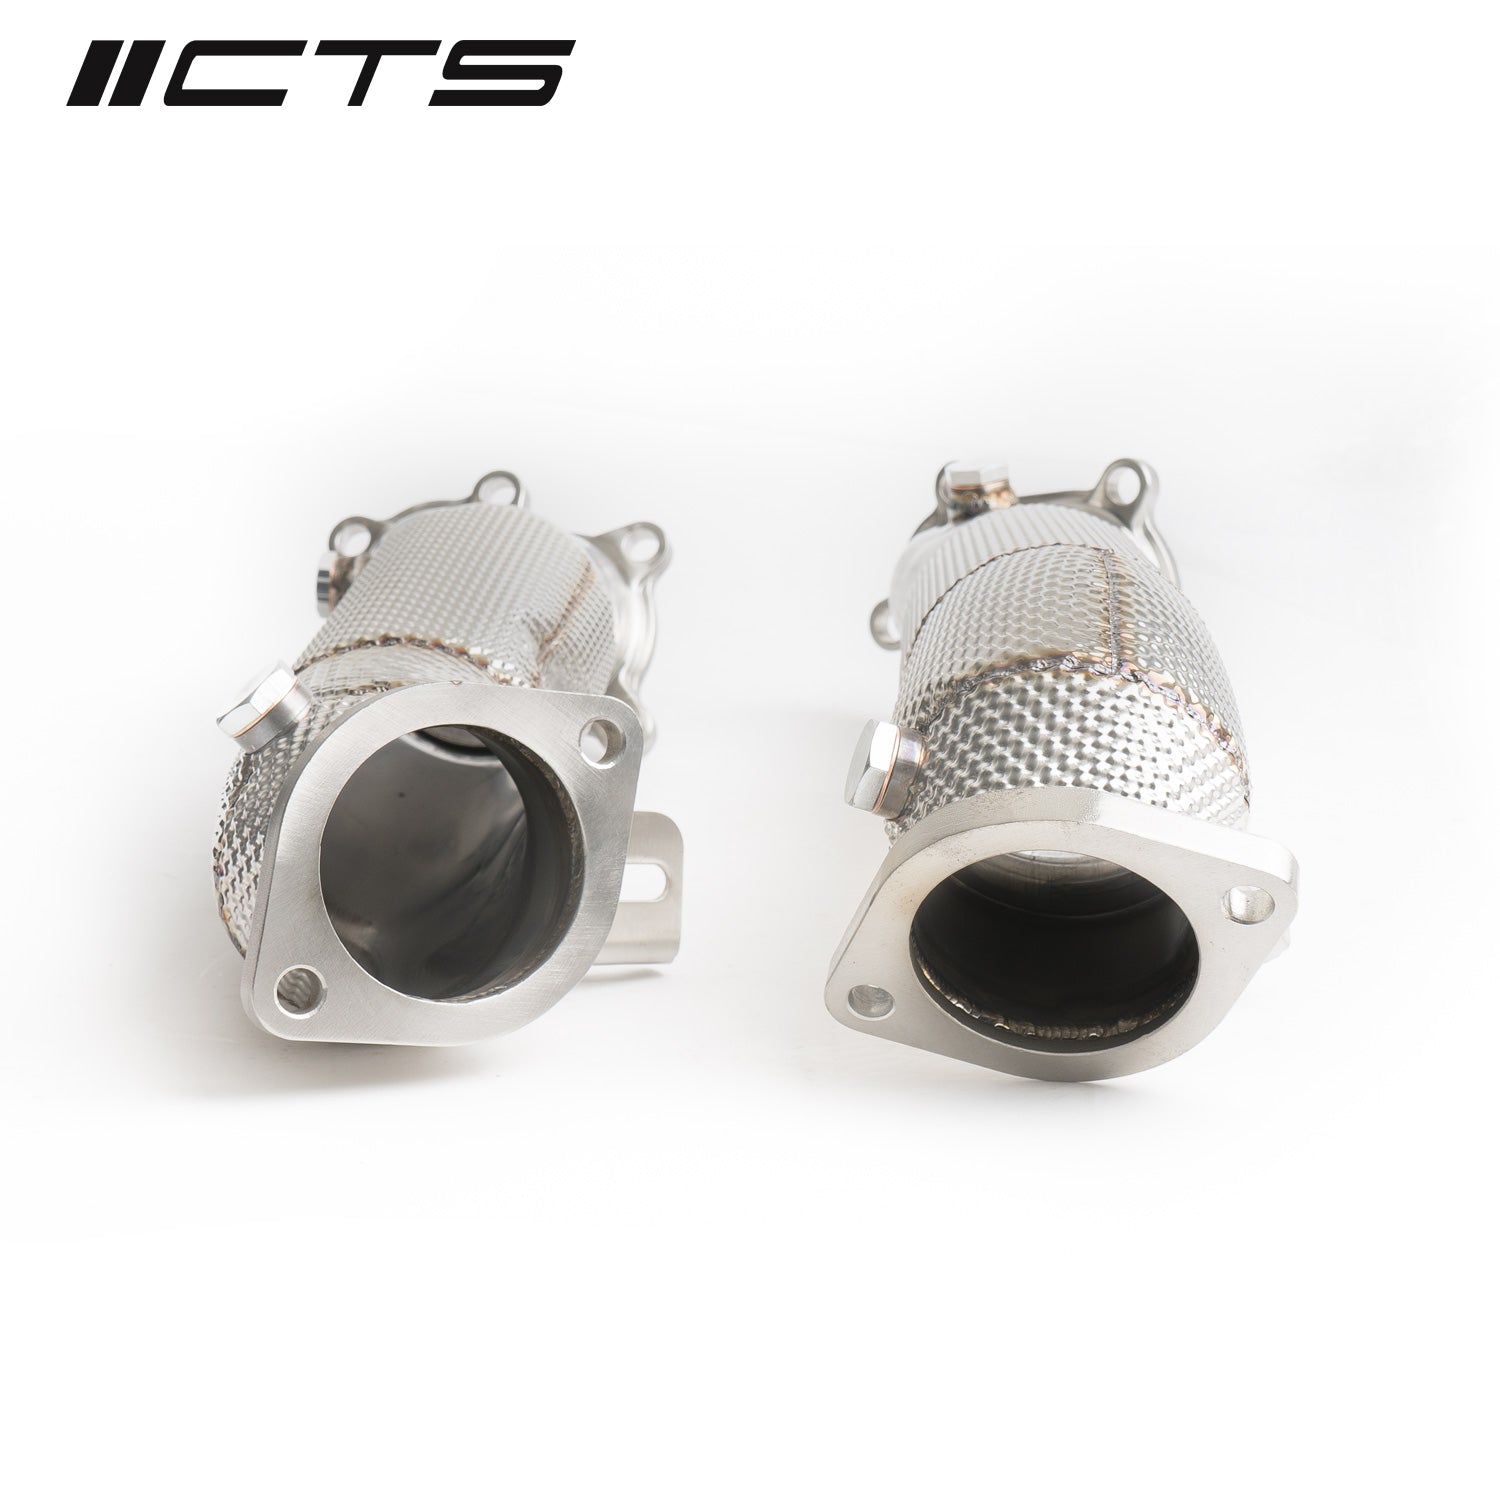 CTS TURBO NISSAN R35 GT-R DOWNPIPES - 0